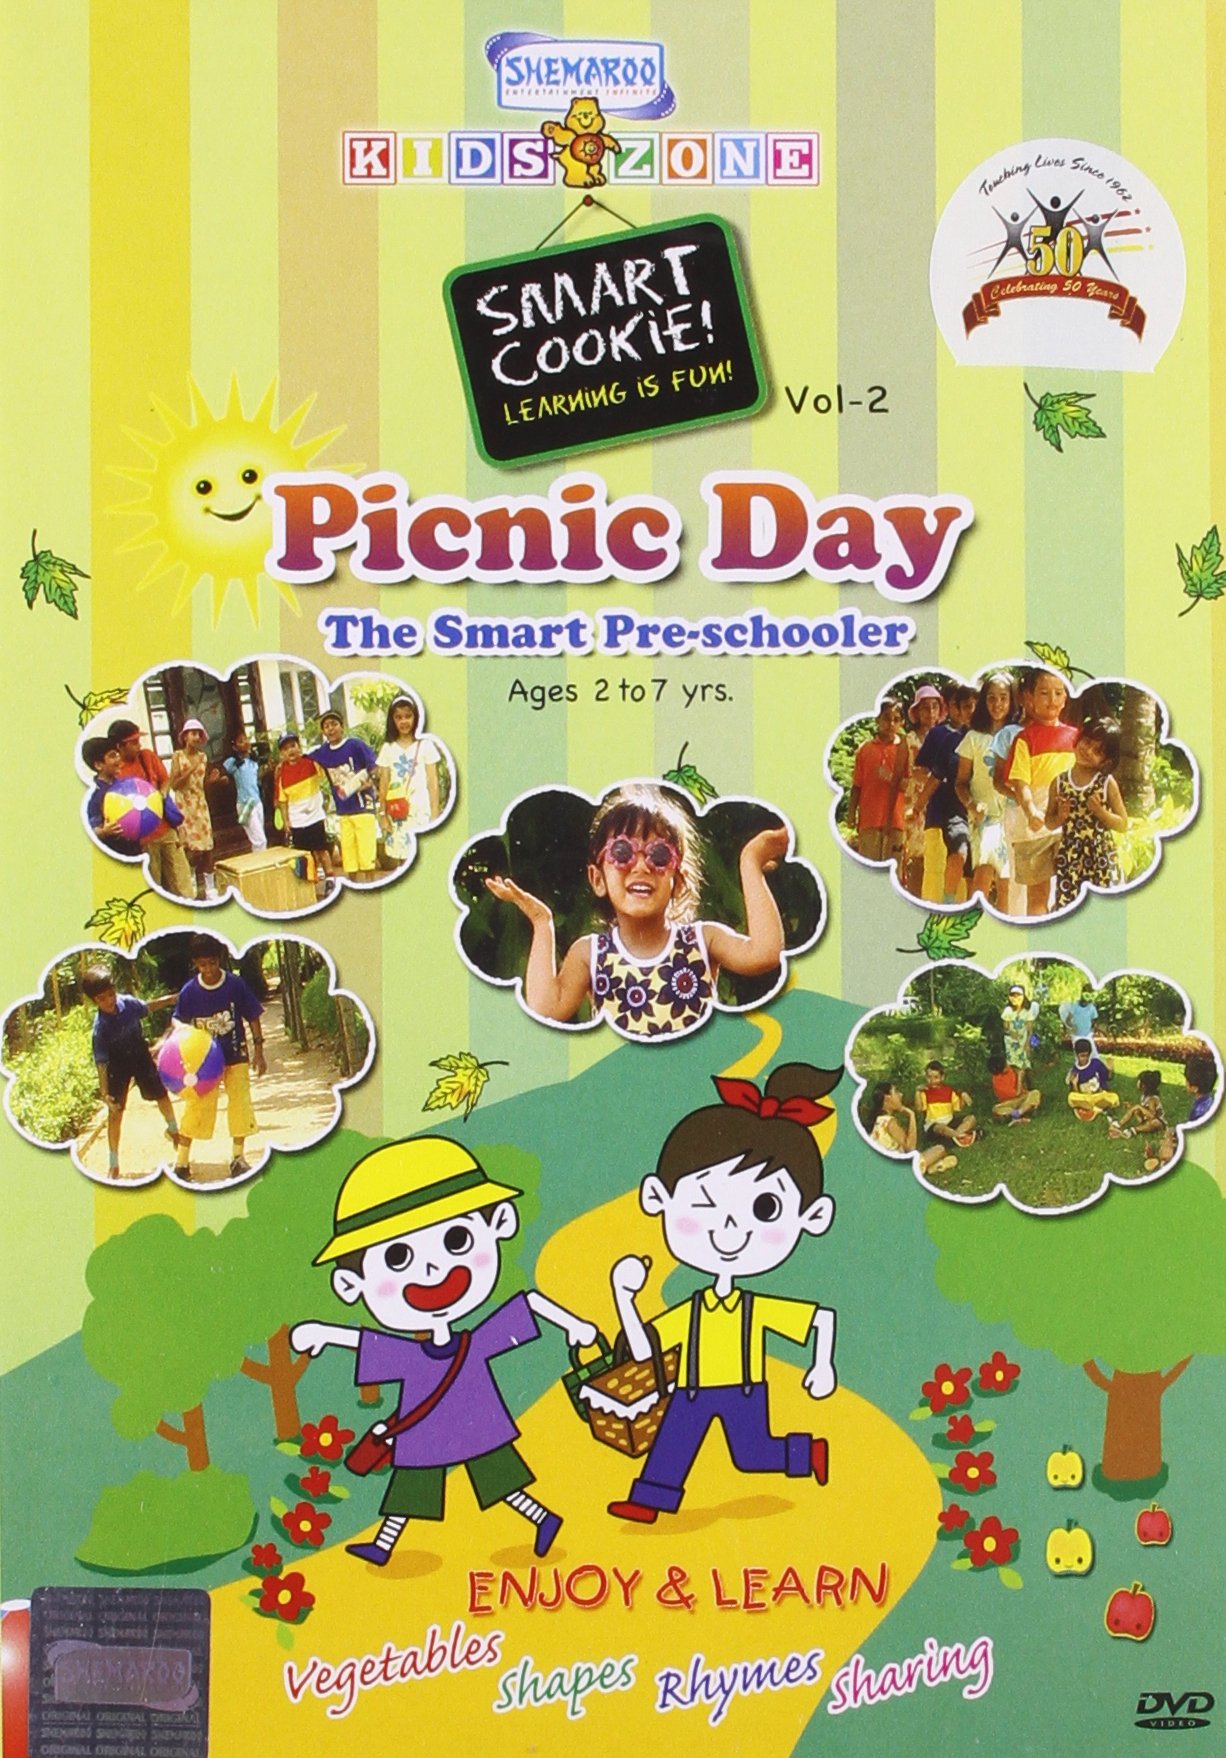 smart-cookie-vol-2-picnic-day-movie-purchase-or-watch-online